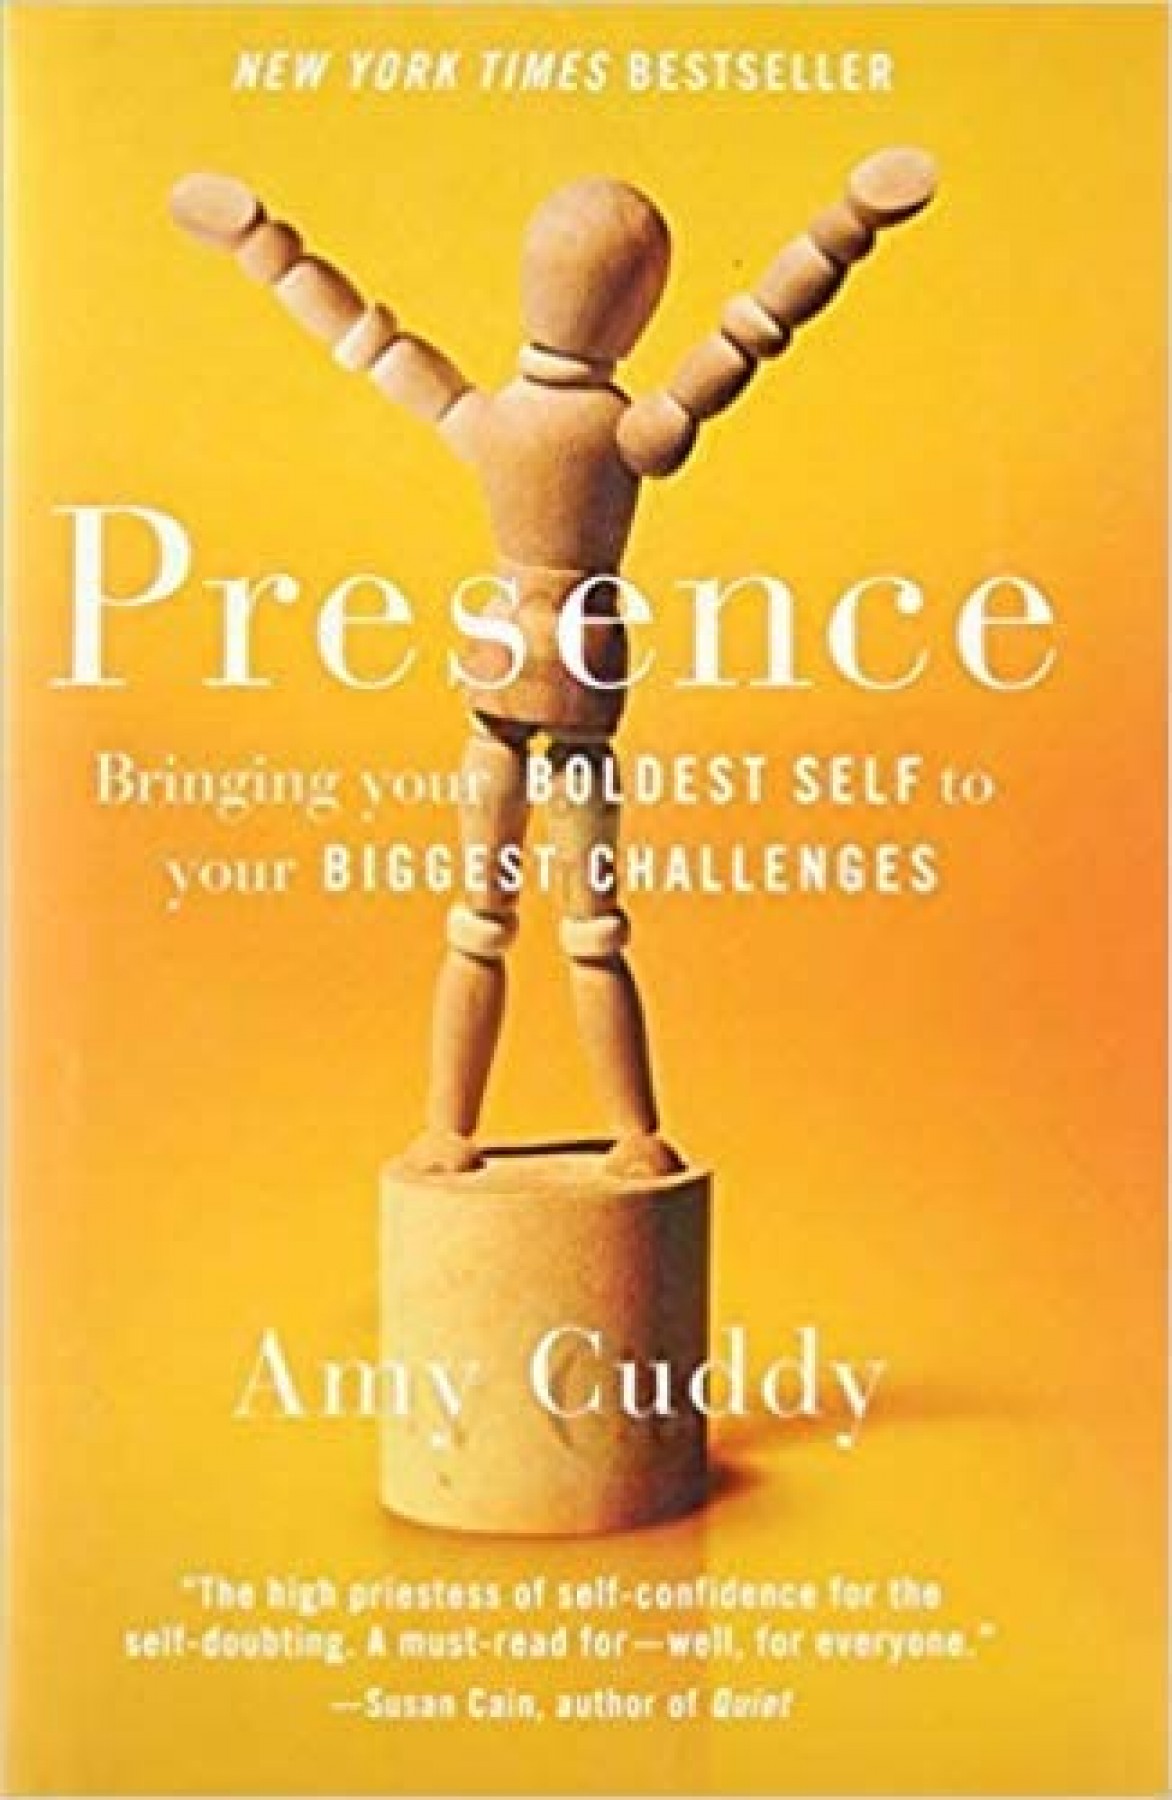 Presence: Bringing your boldest self to your biggest challenges